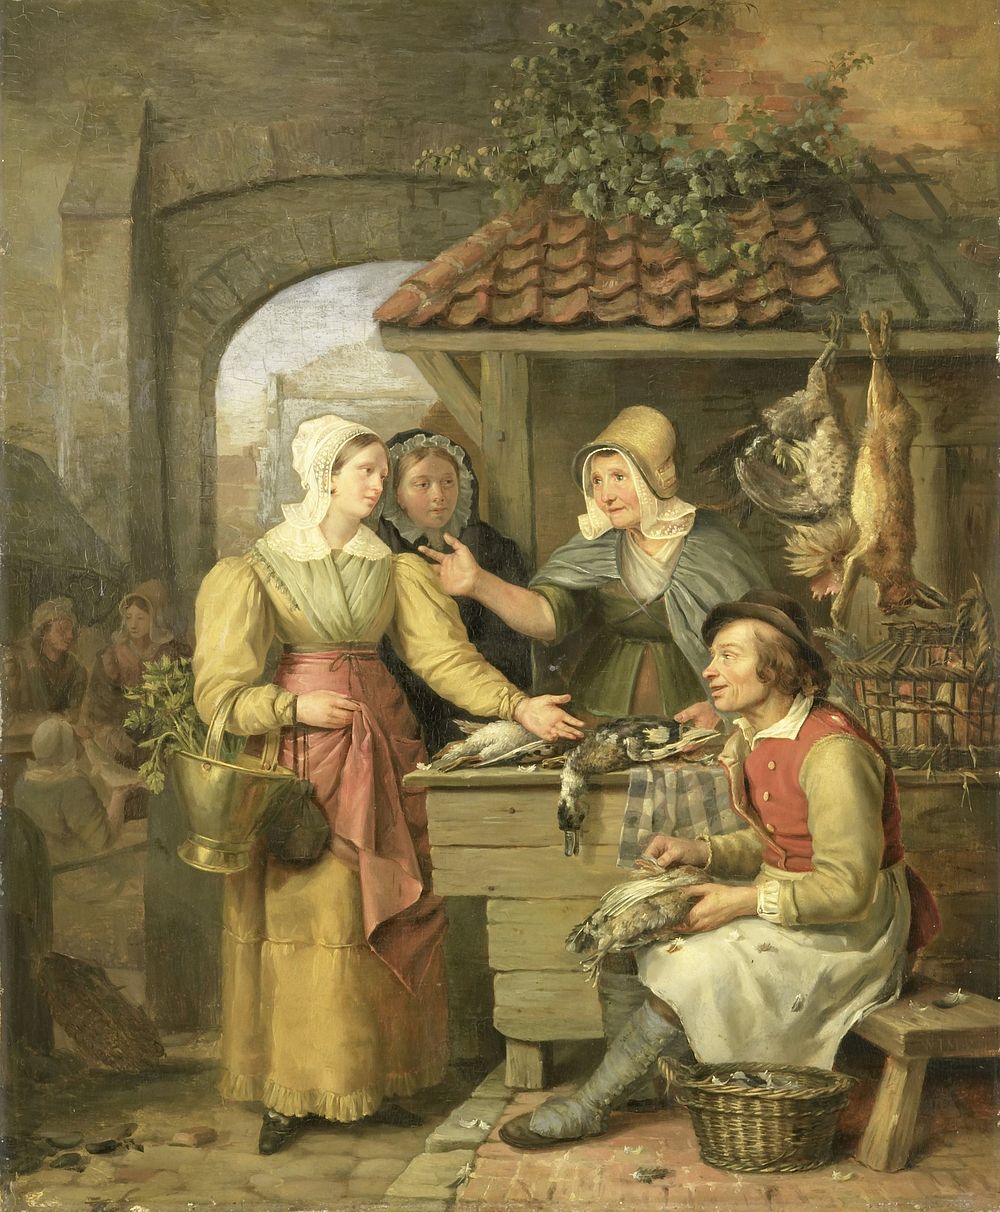 The Poultry Stall (c. 1830) by Willem Jodocus Mattheus Engelberts